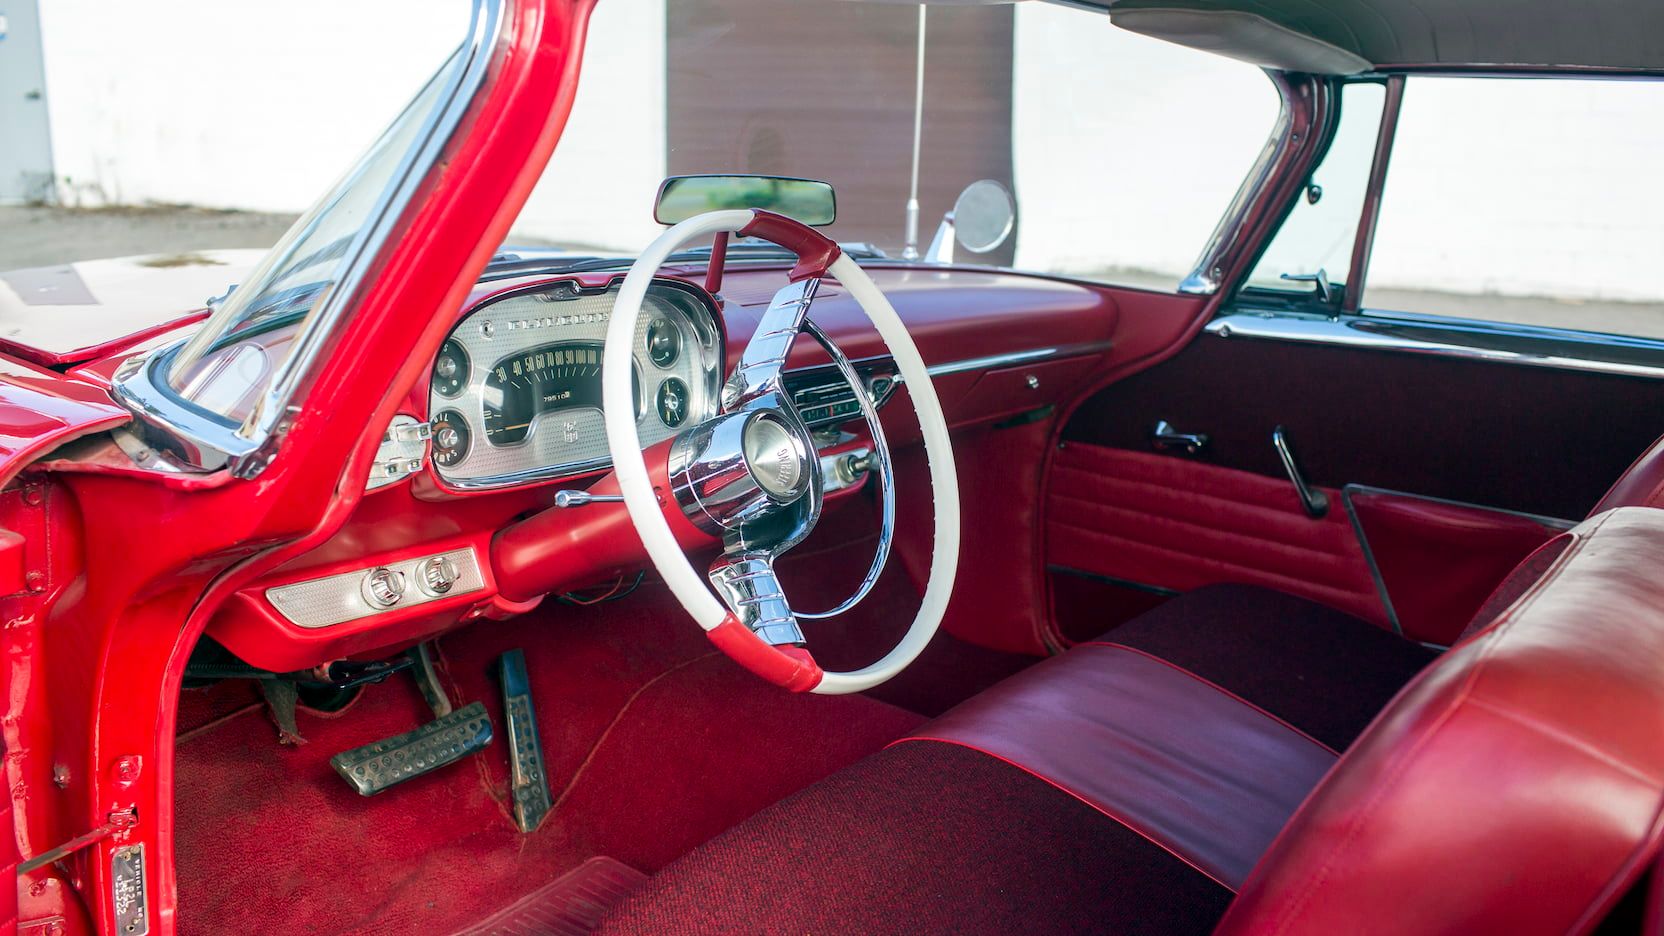 1958 Plymouth Fury steering wheel close-up view